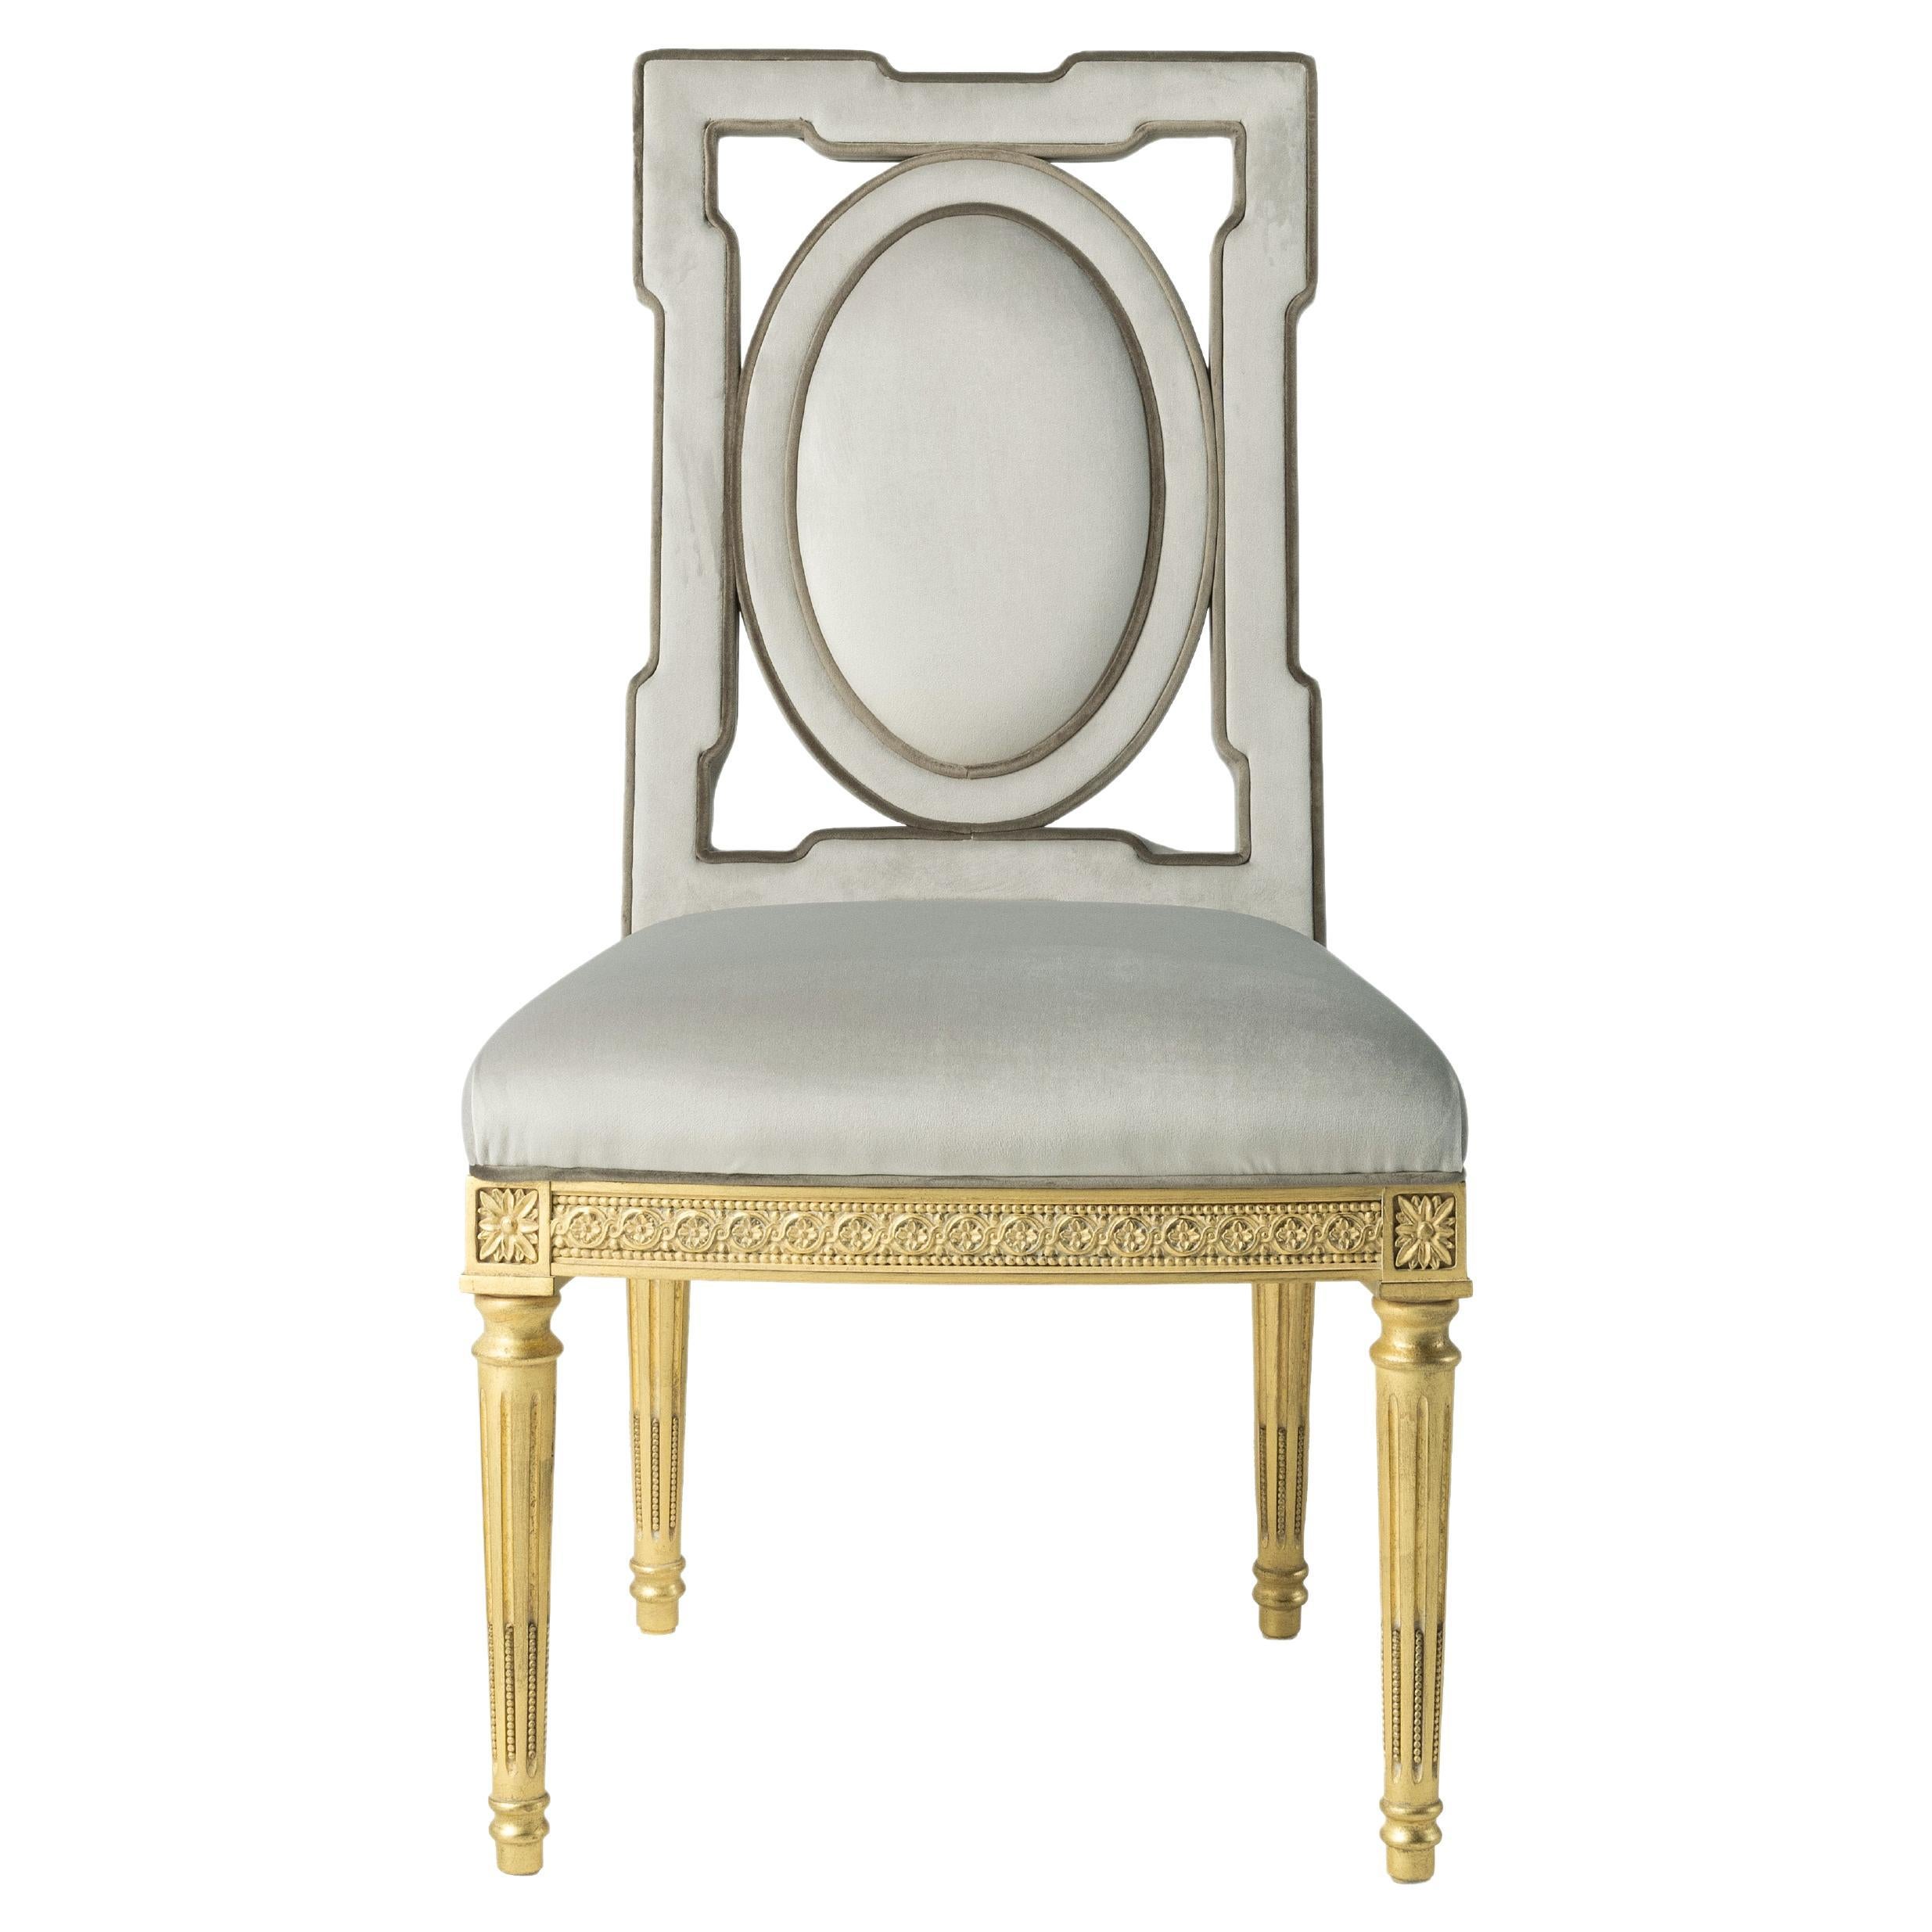 21st Century Satin Chair in Hand-carved Wood and Fabric in Style of Louis XVI